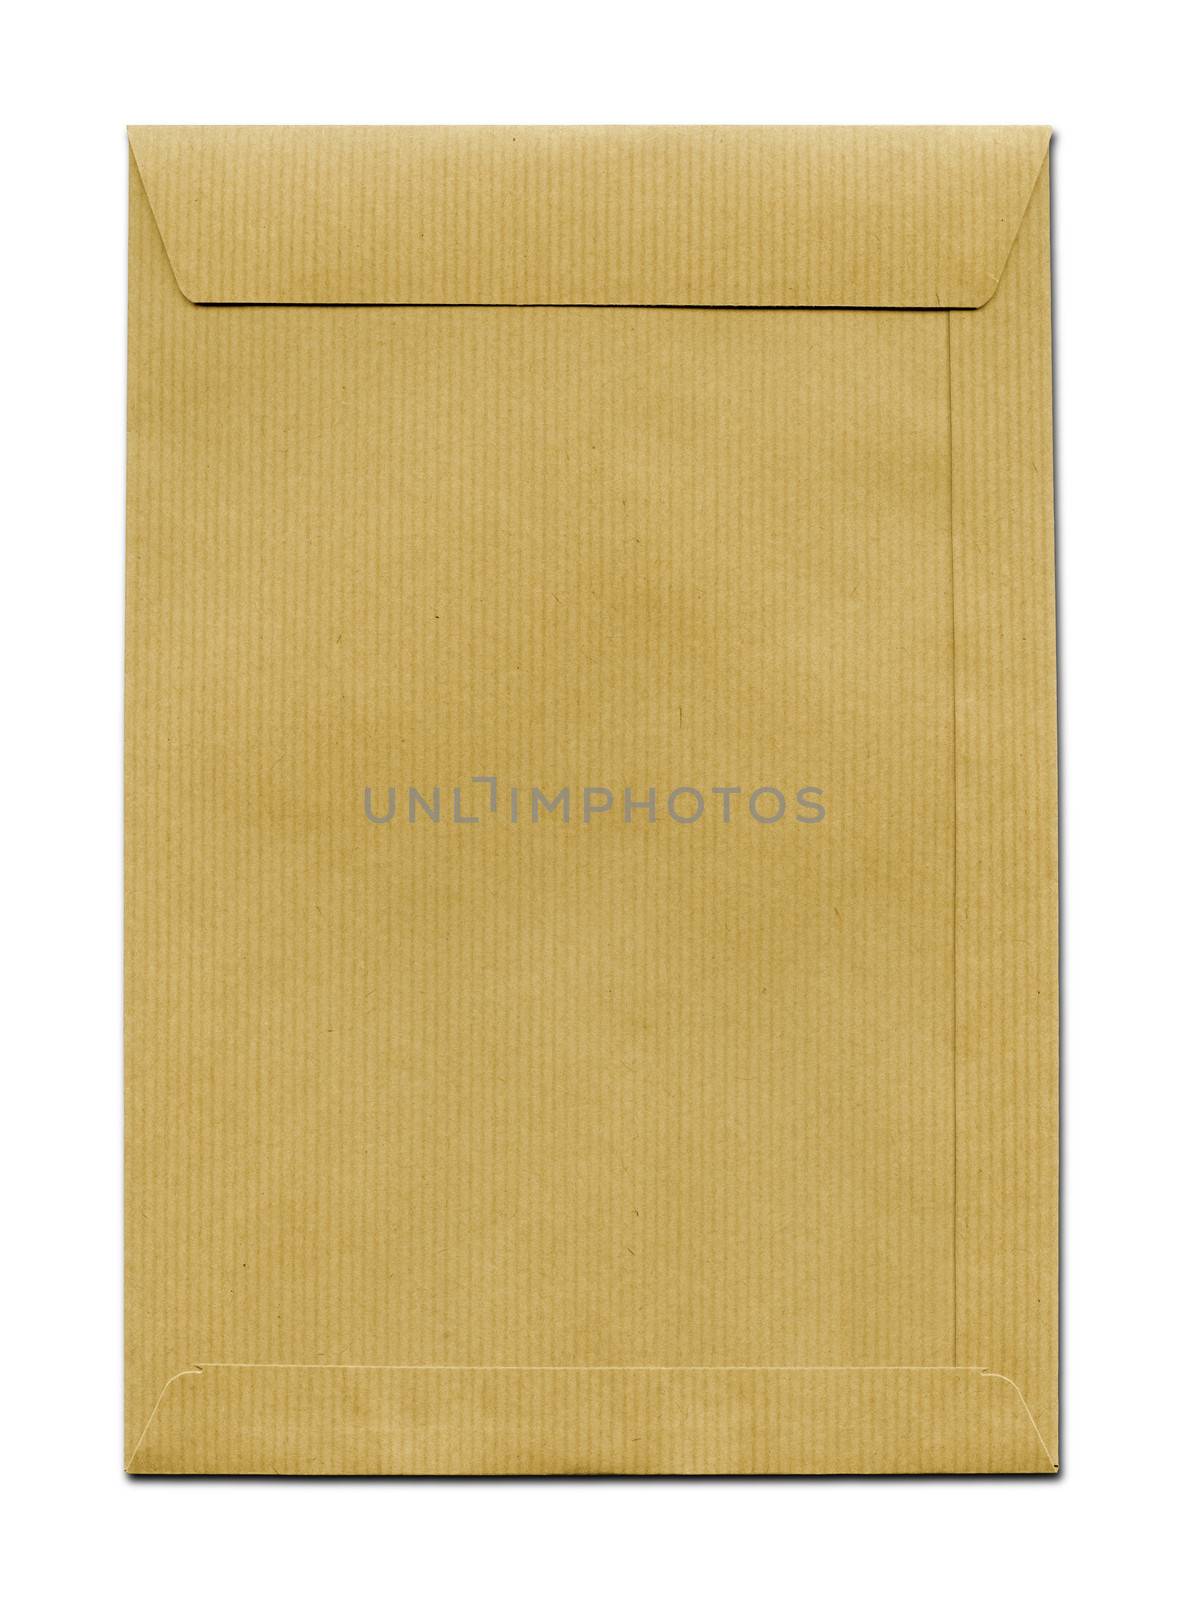 Brown paper textured envelope isolated on white with clipping path